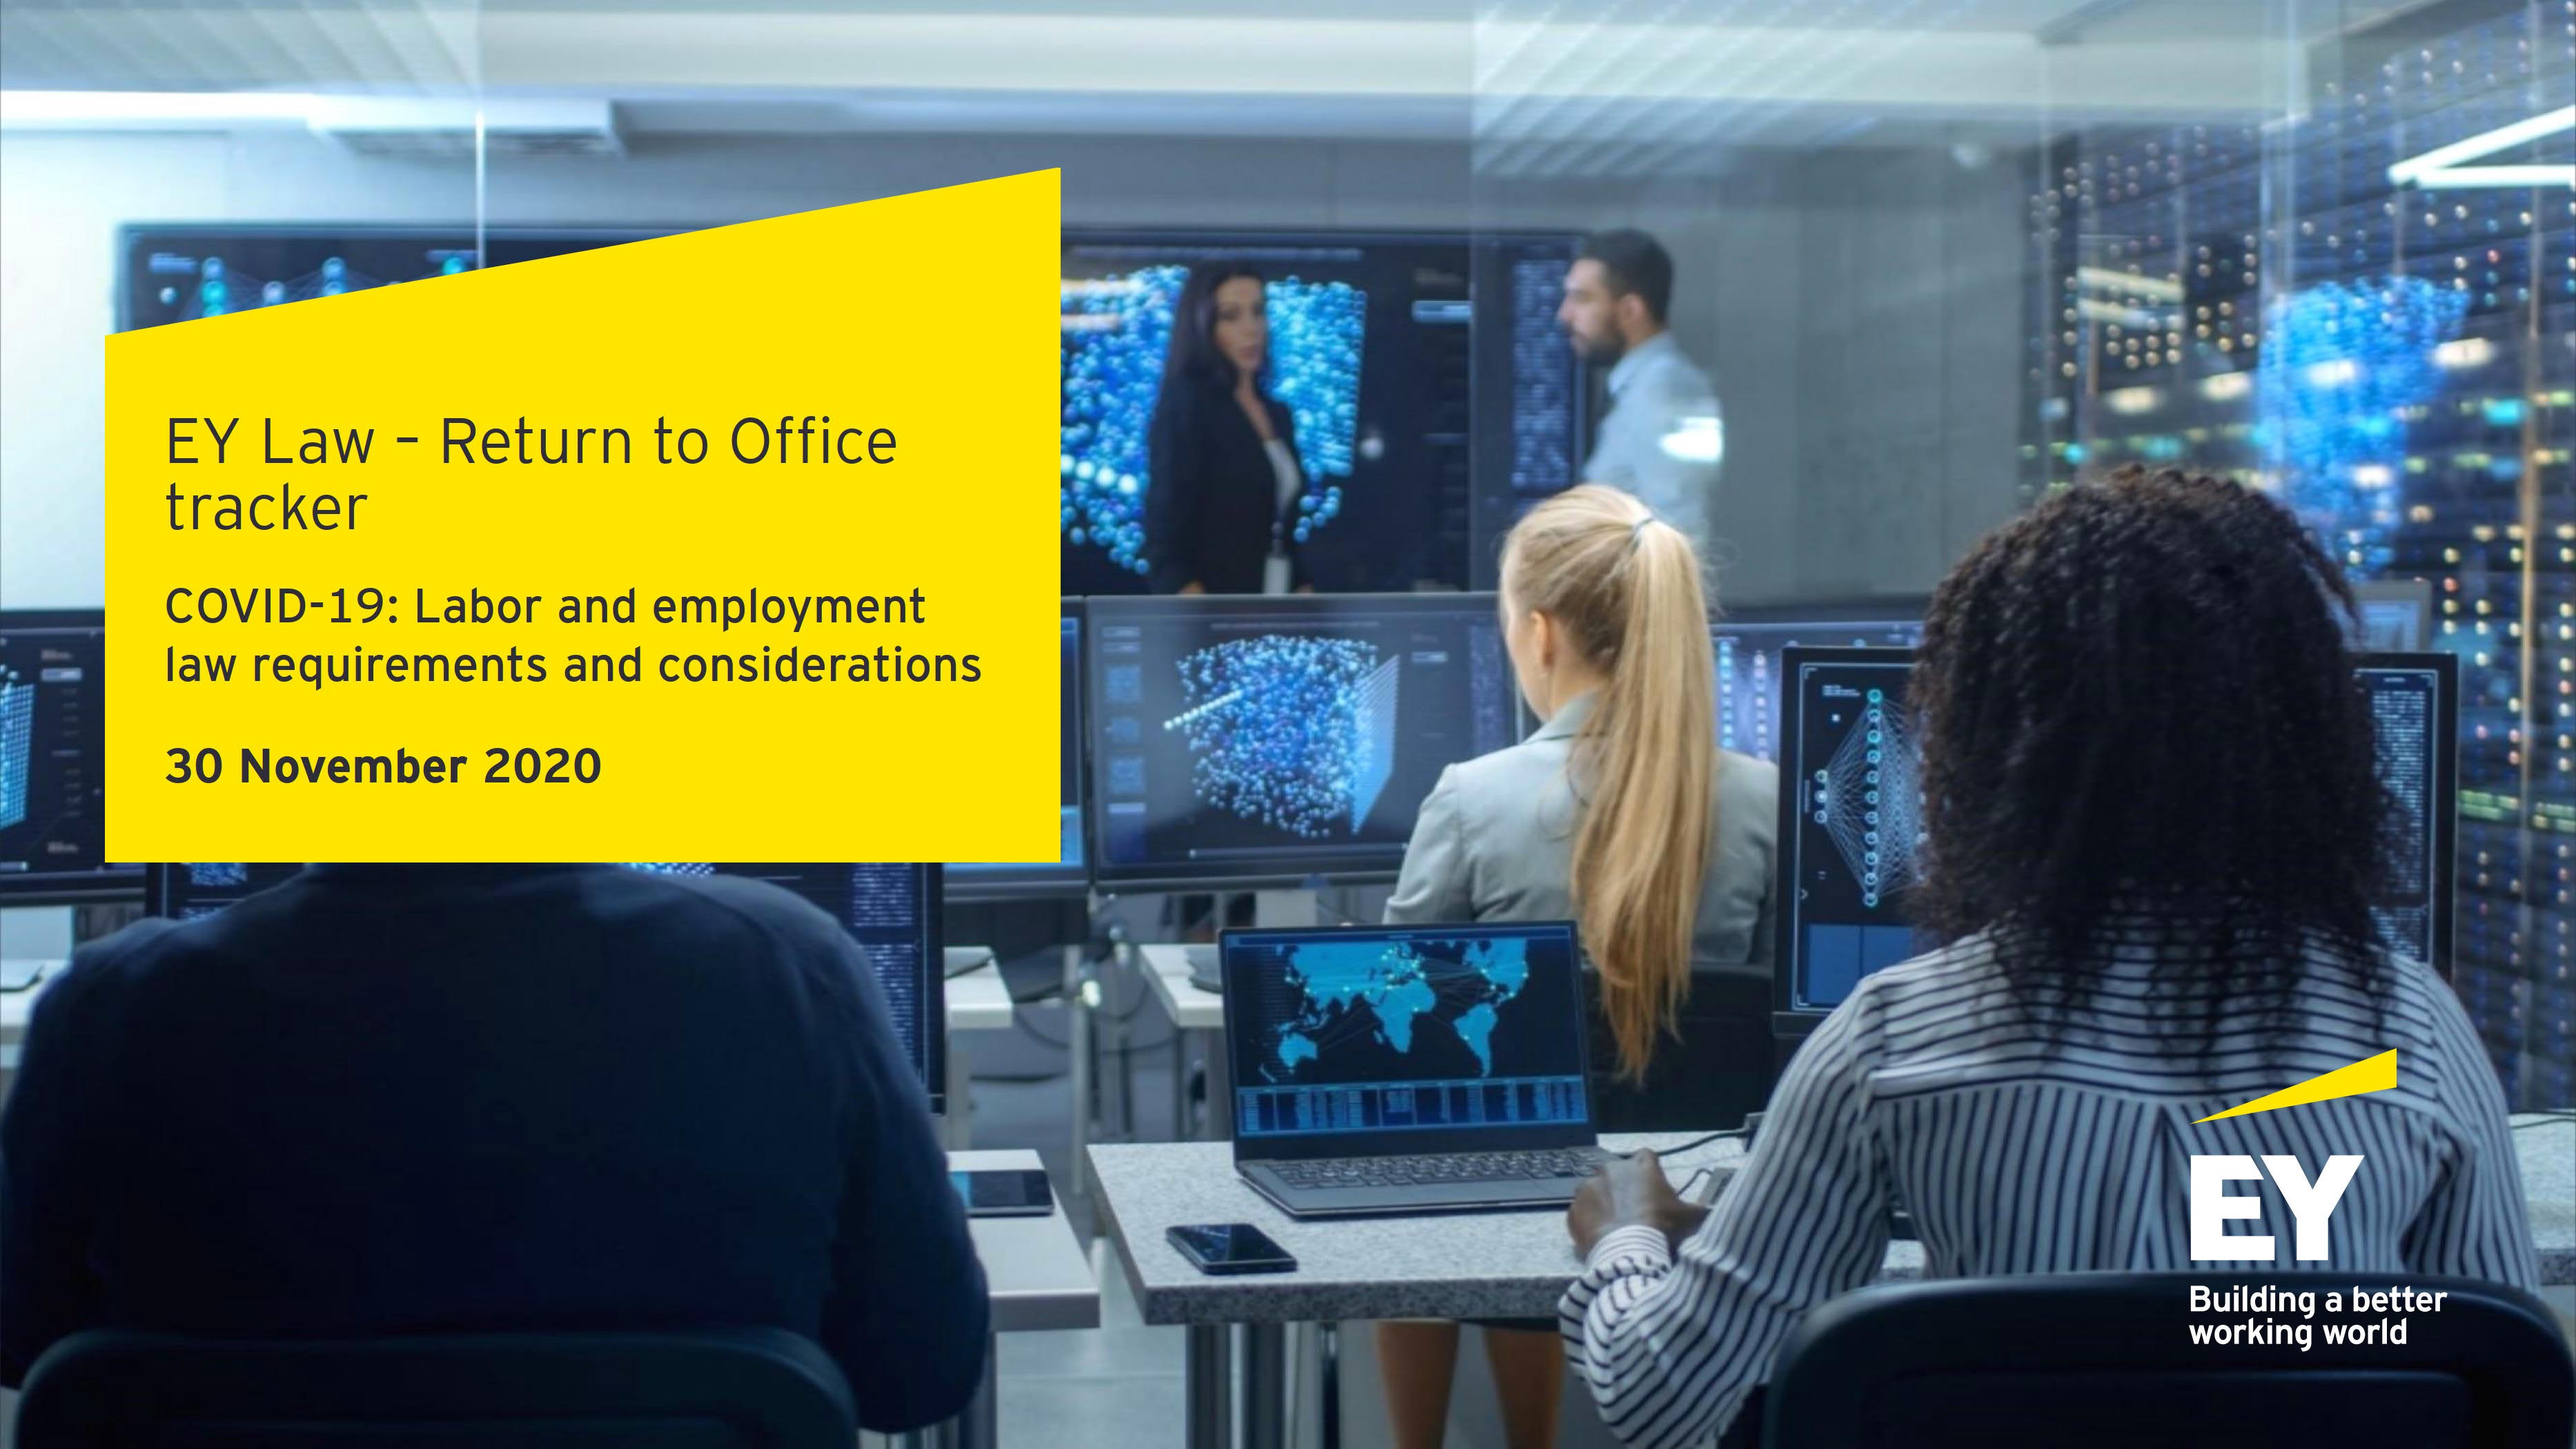 EY Law – Return to Office tracker COVID-19 Labor and employment law requirements and considerations 30 November 2020